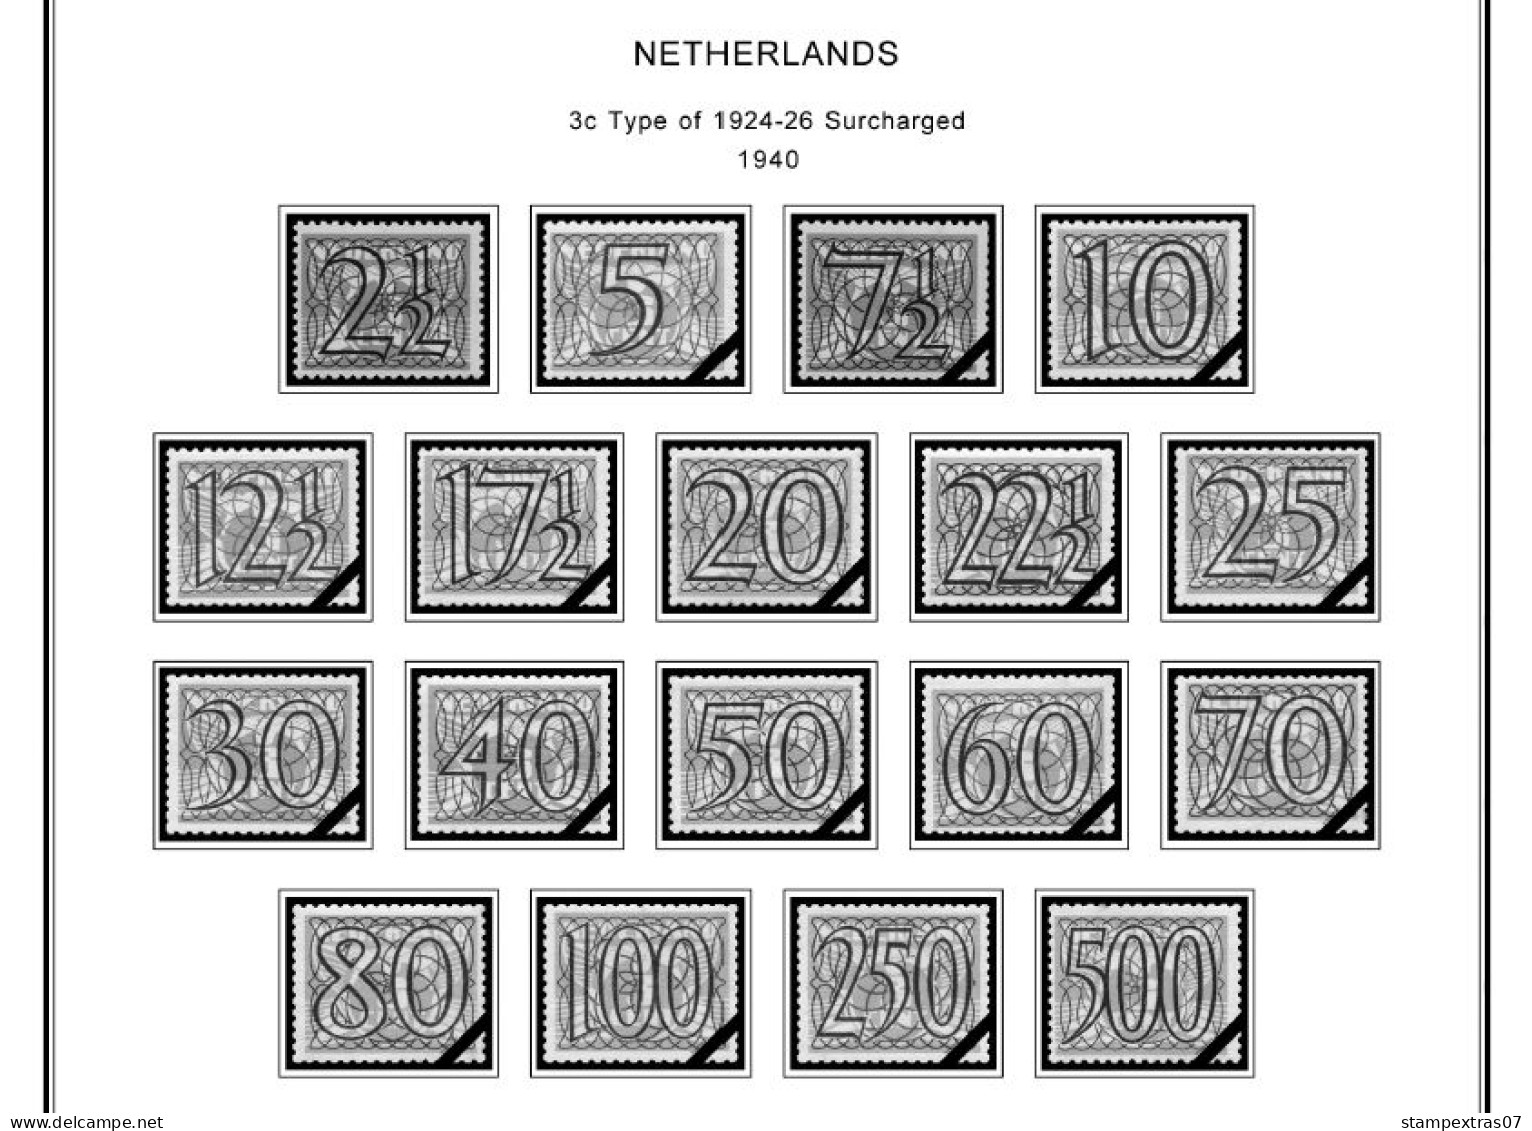 NETHERLANDS 1852-2010 + 2011-2020 STAMP ALBUM PAGES (474 b&w illustrated pages)